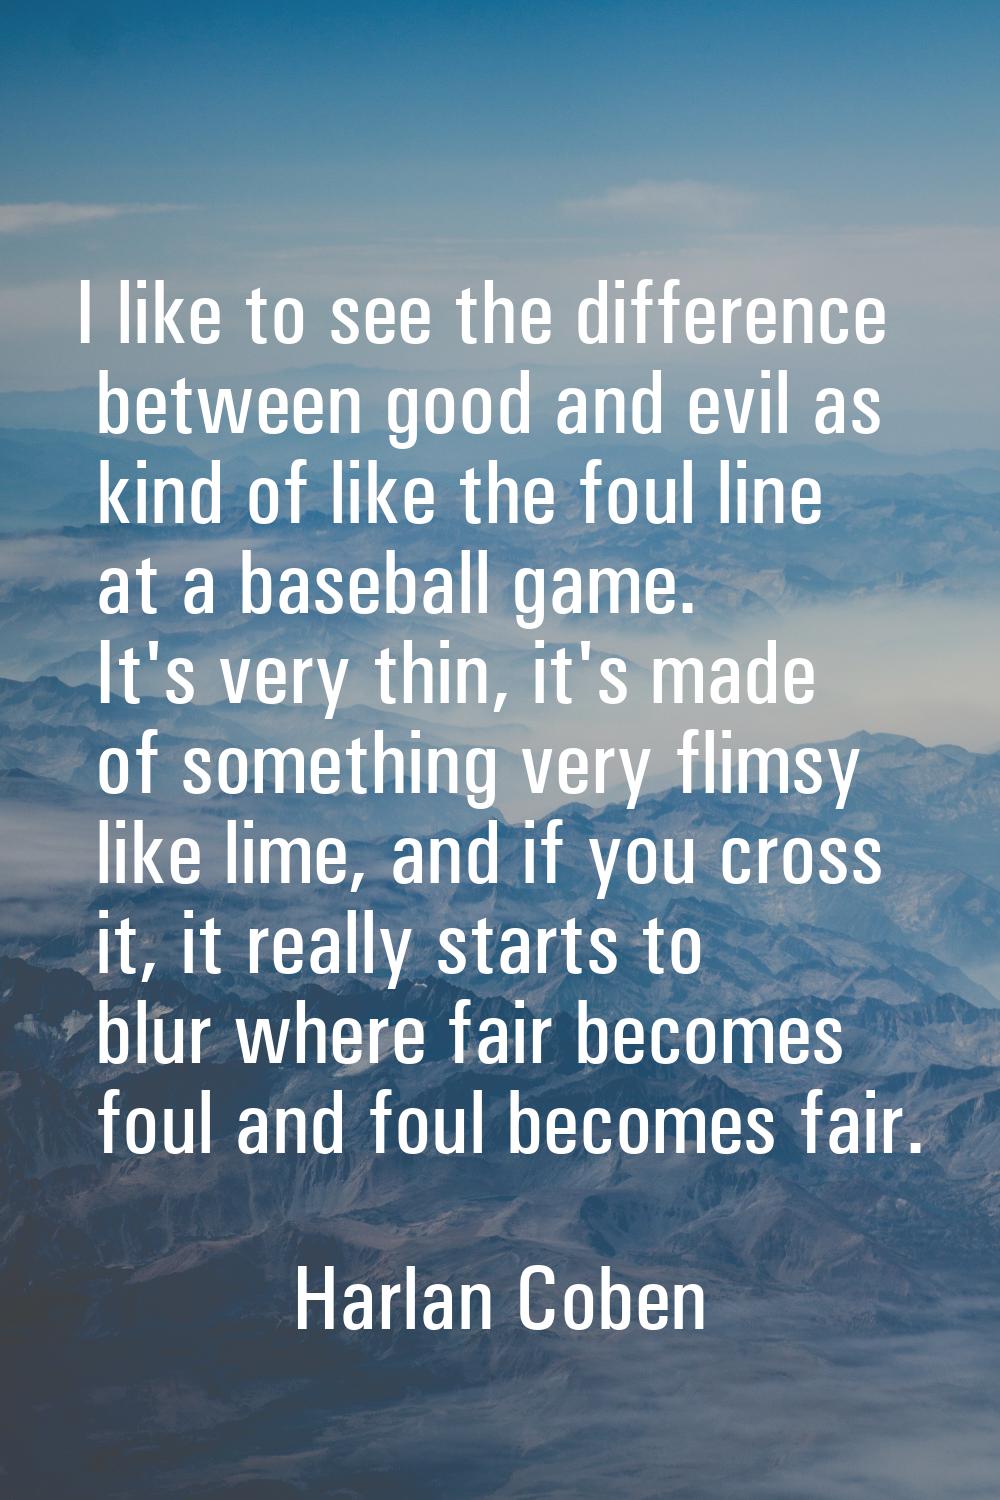 I like to see the difference between good and evil as kind of like the foul line at a baseball game